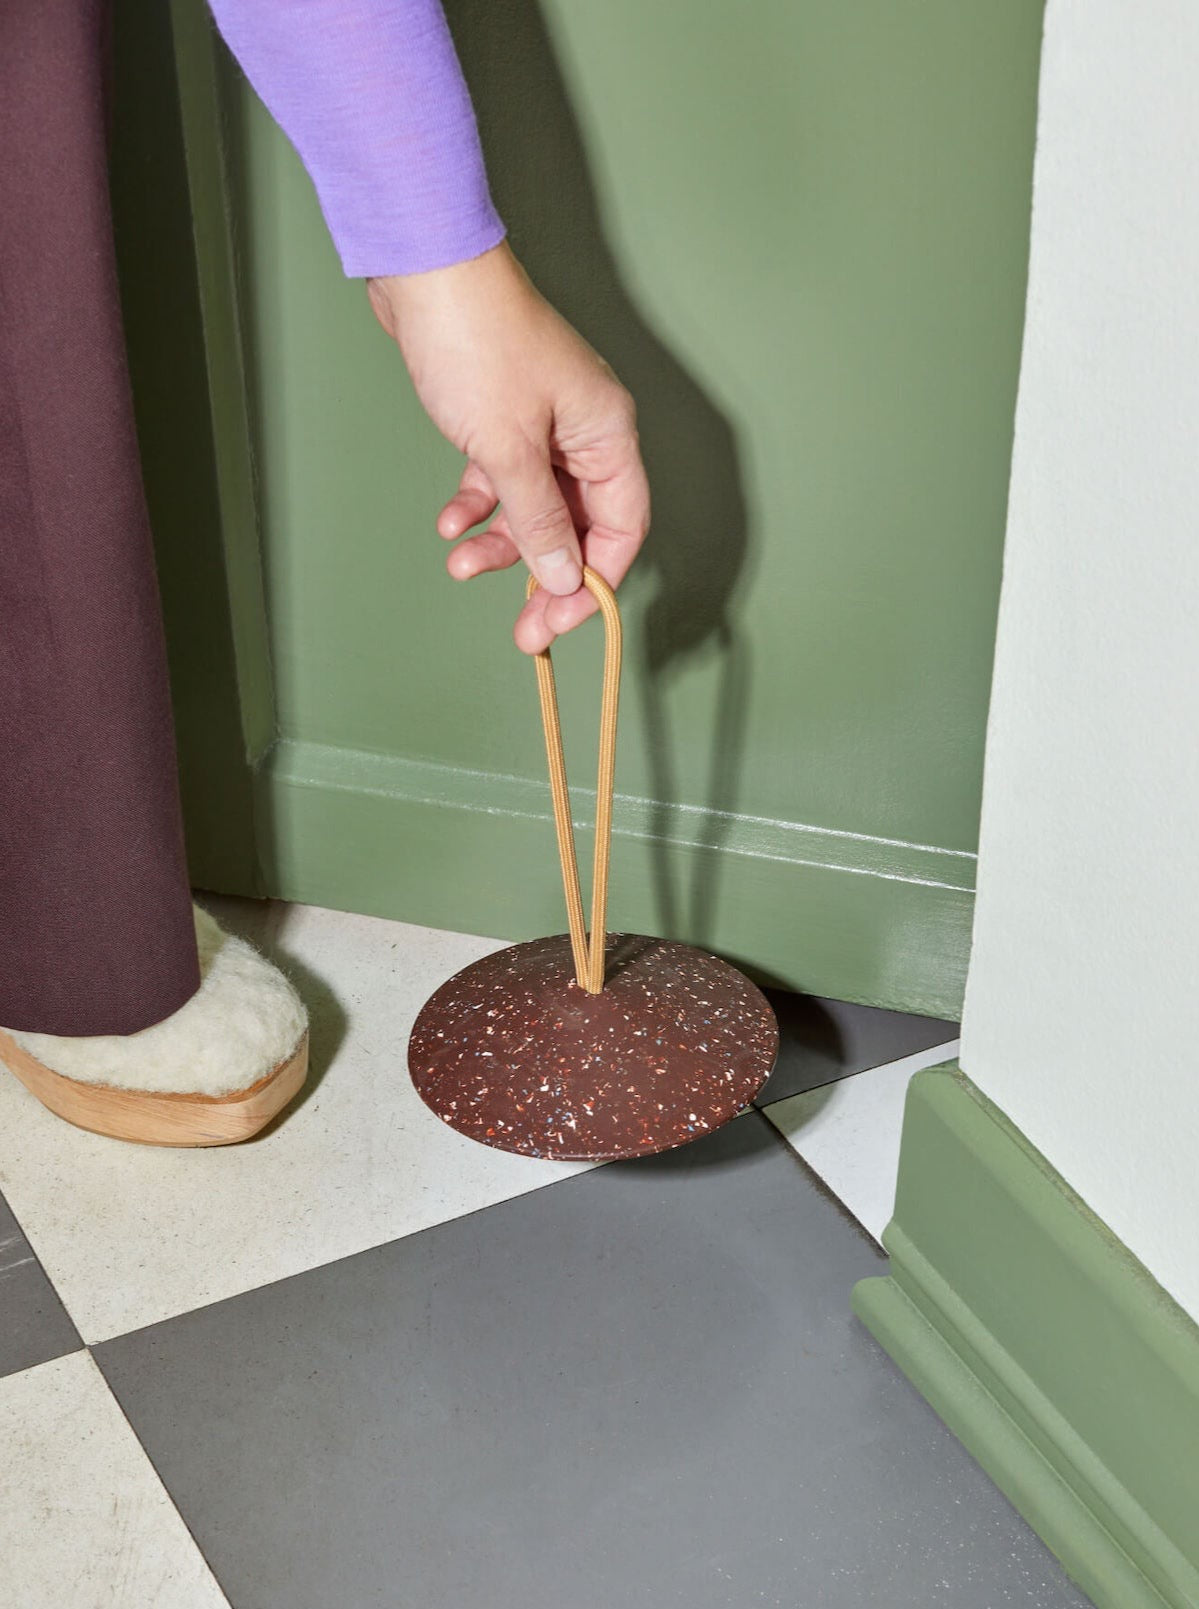 A person holding a Pidät wooden spoon on a tiled floor.